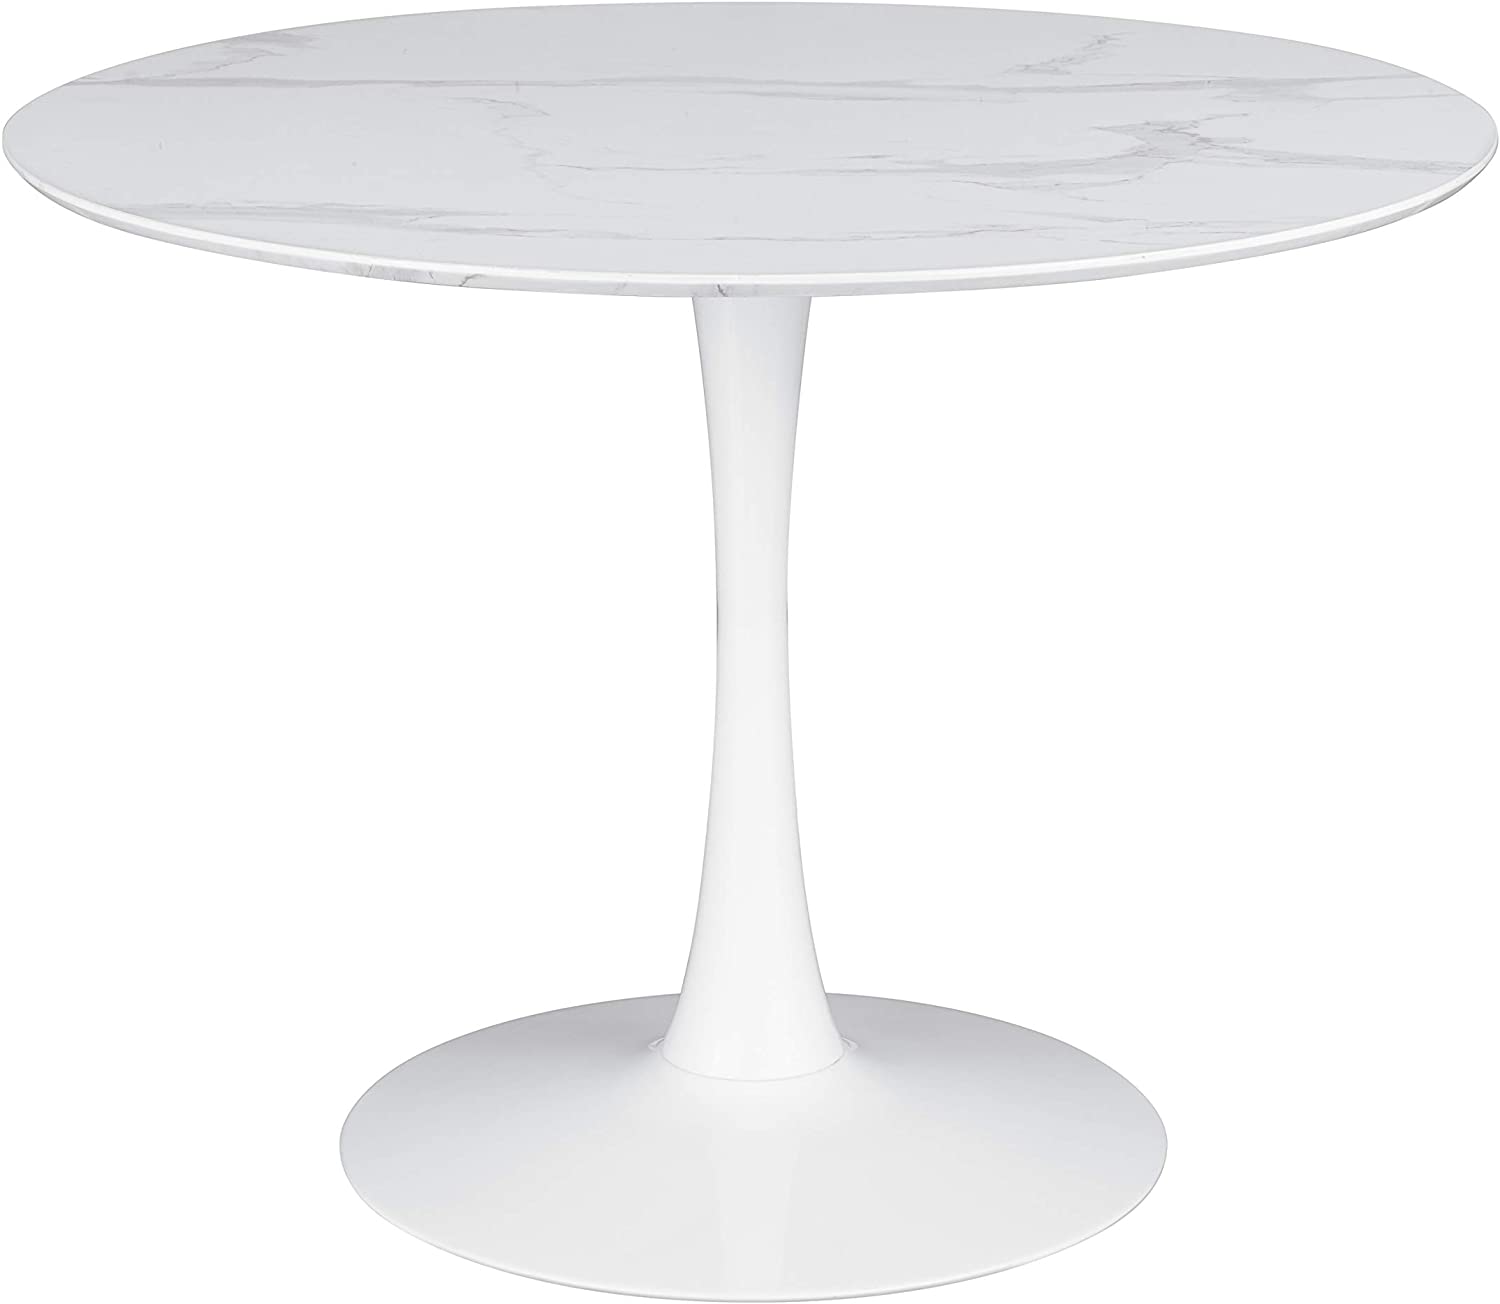 Arkell 40-Inch Faux Marble Dining Table with Round Pedestal in White